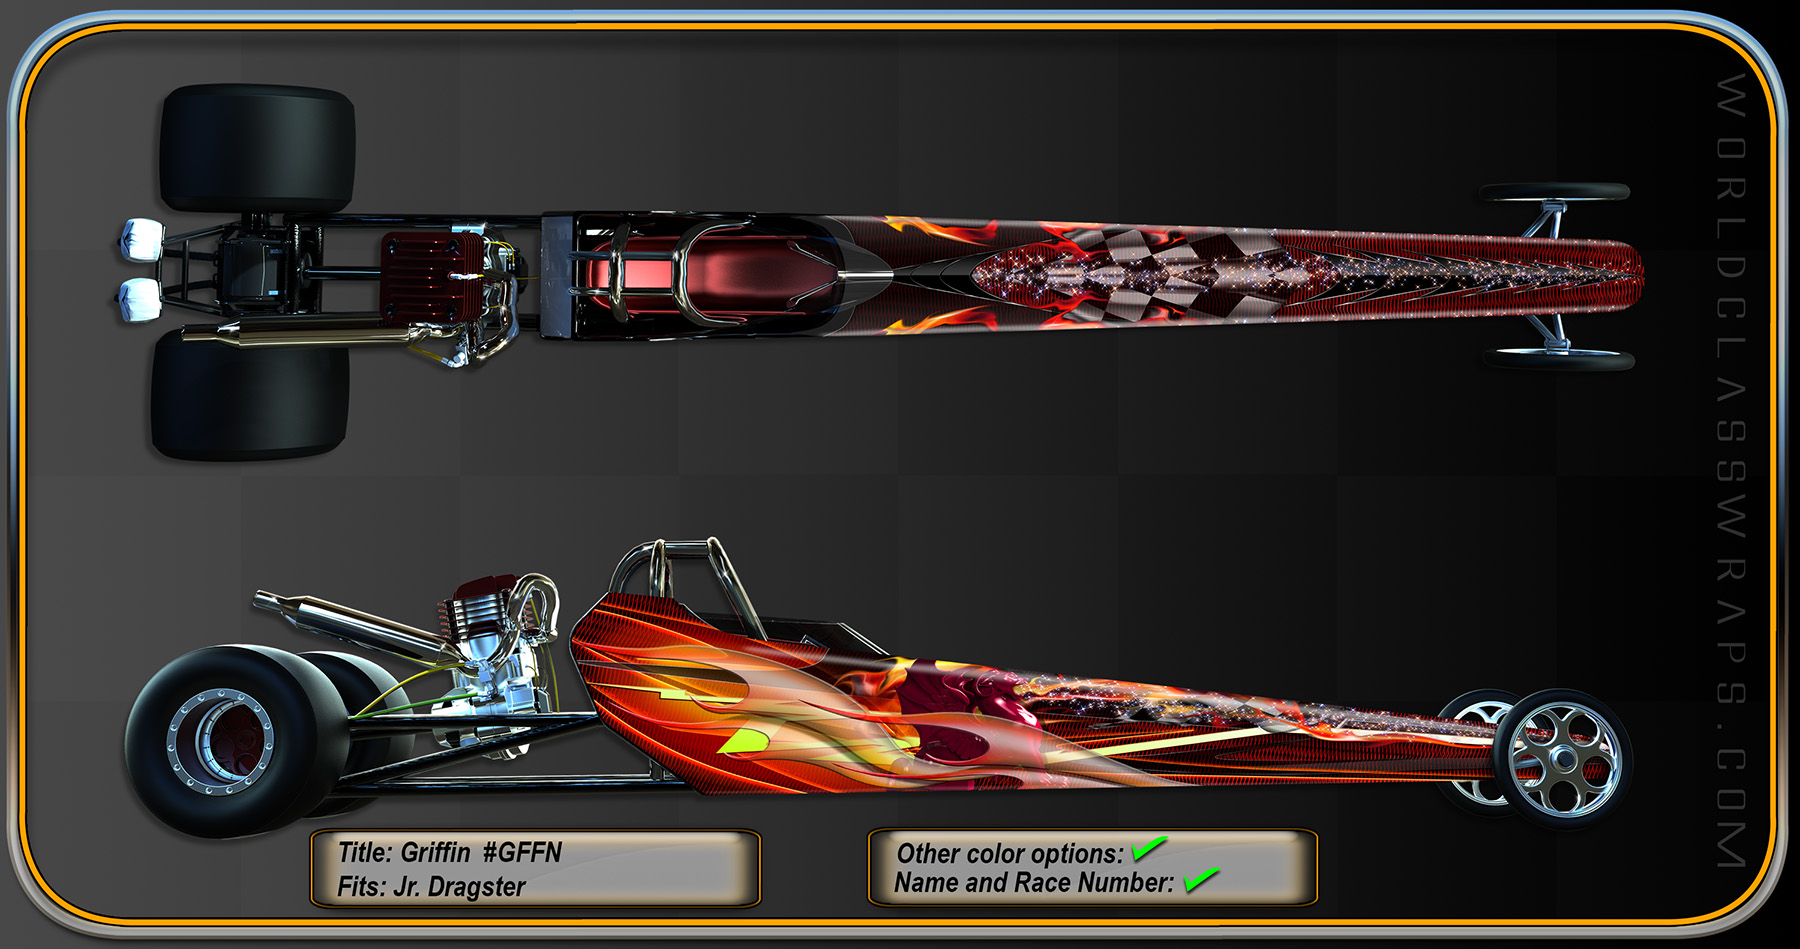 dragster graphics wrap image titled Griffin